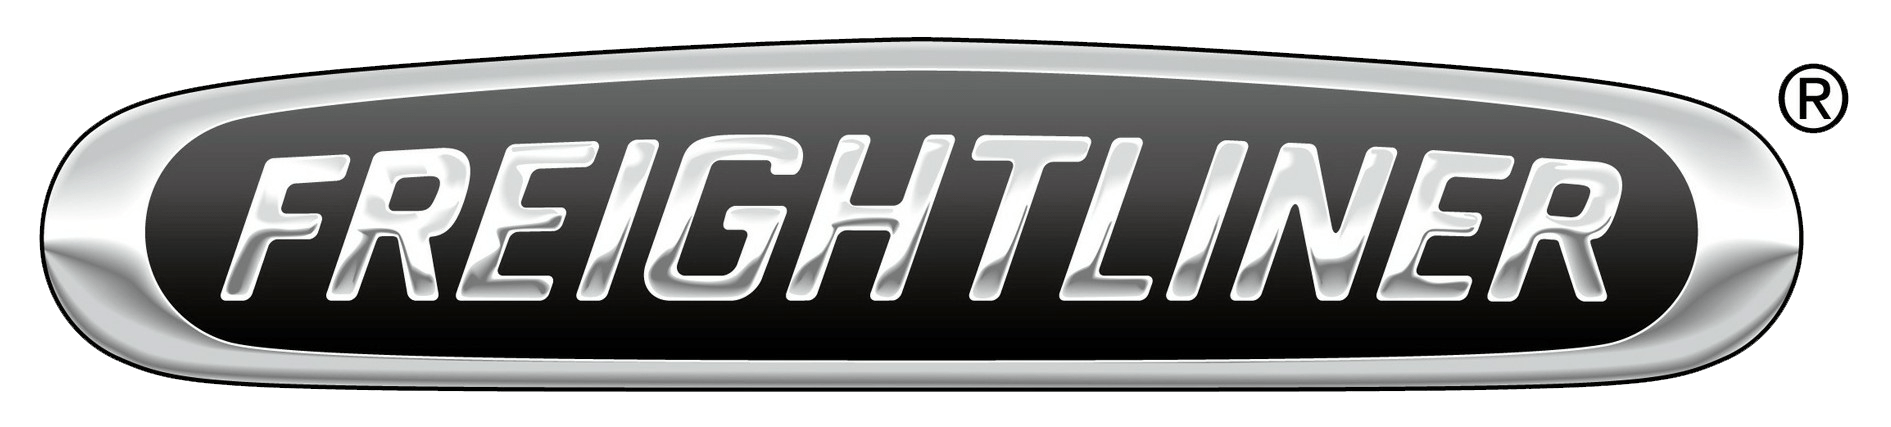 Daimler Freightliner Logo - Freightliner reviews, news, pictures, and video - Roadshow